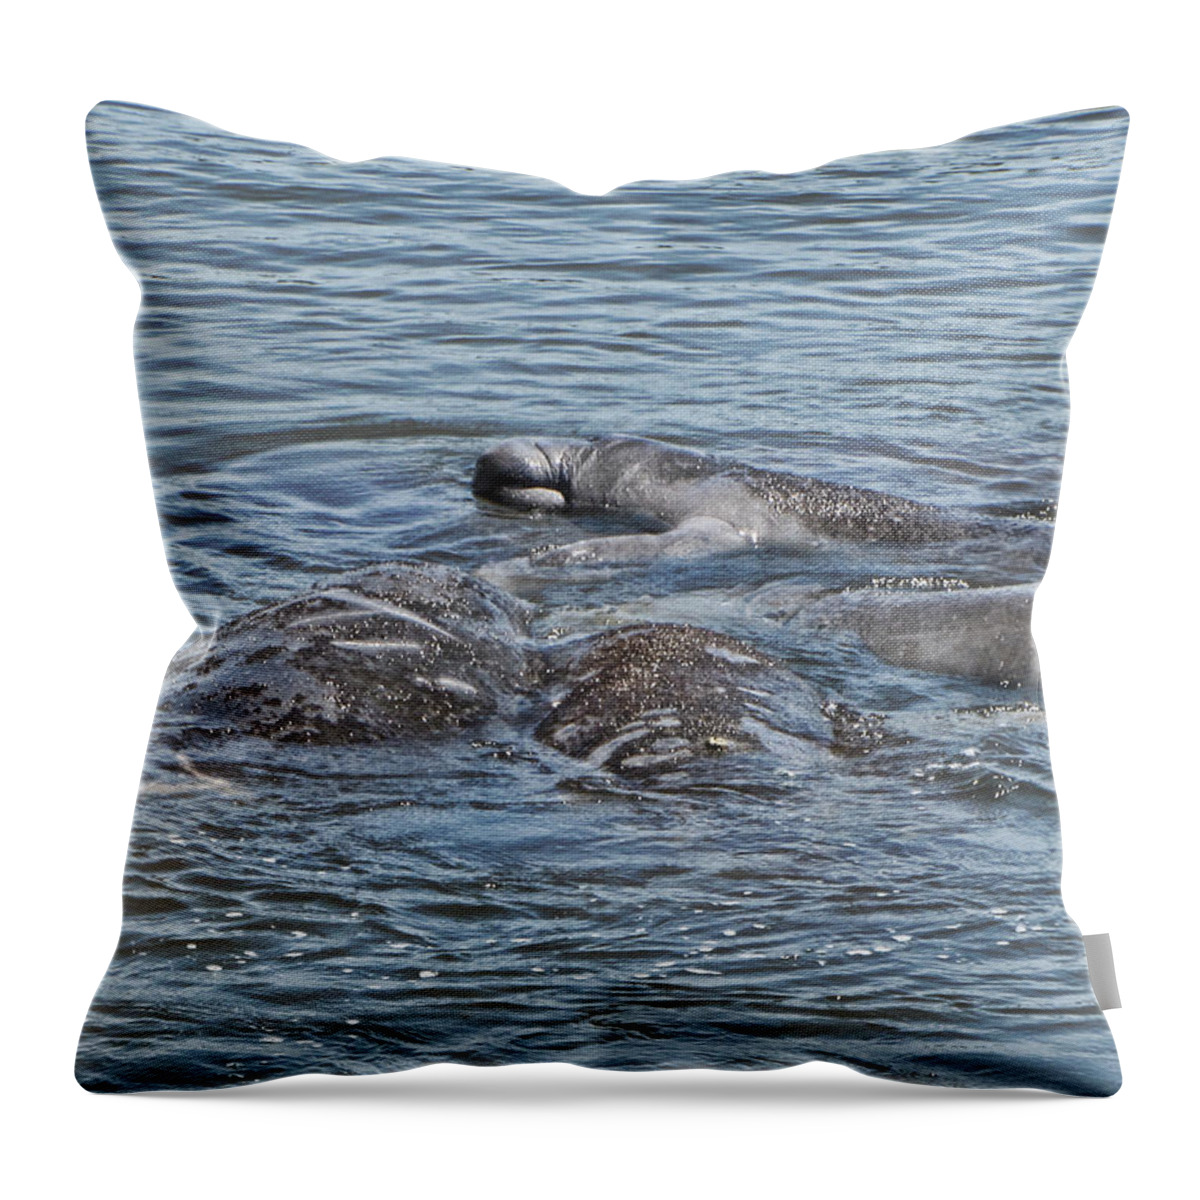 Manatee Throw Pillow featuring the photograph Playful Manatees by Christopher Mercer